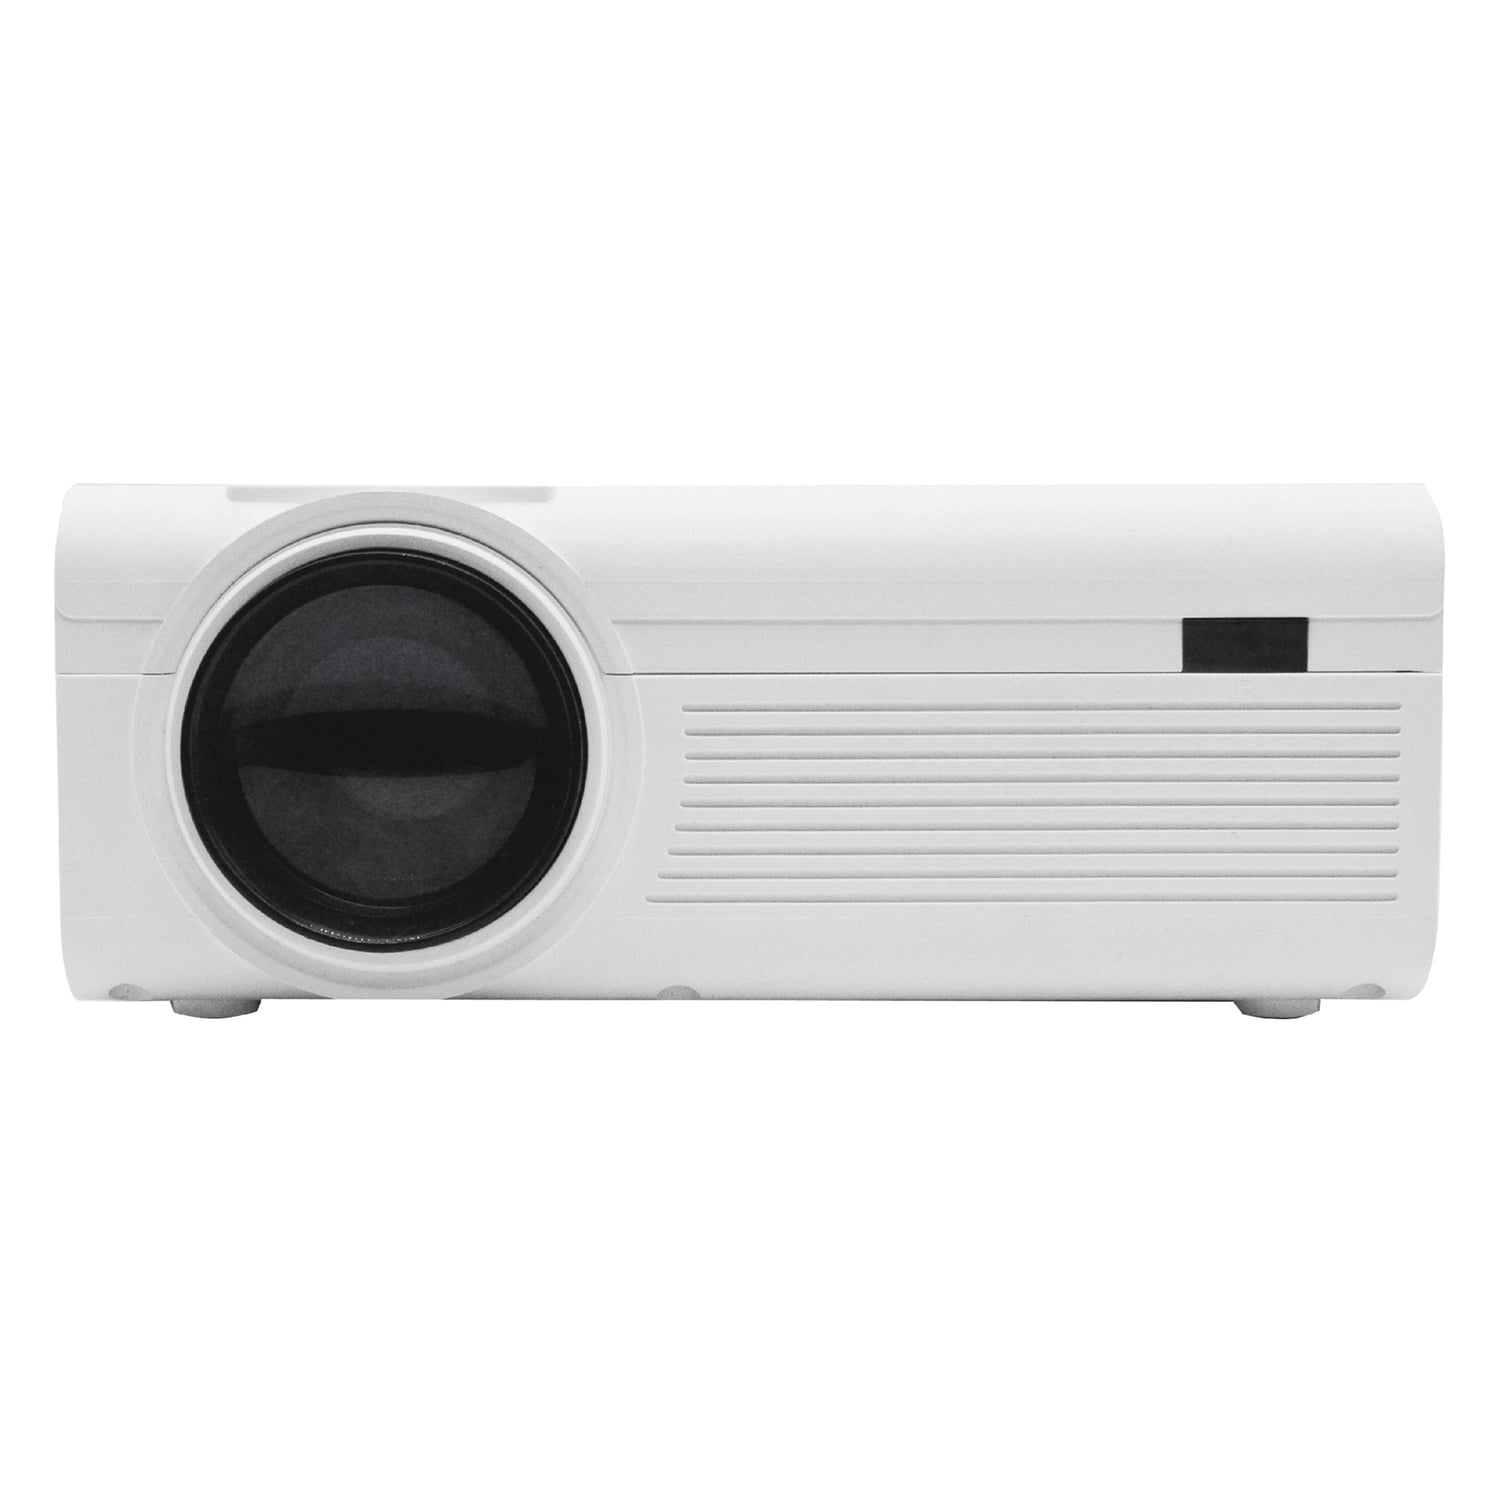 GPX TFT LCD Bluetooth Projector with HDMI Cable, PJ712W, White